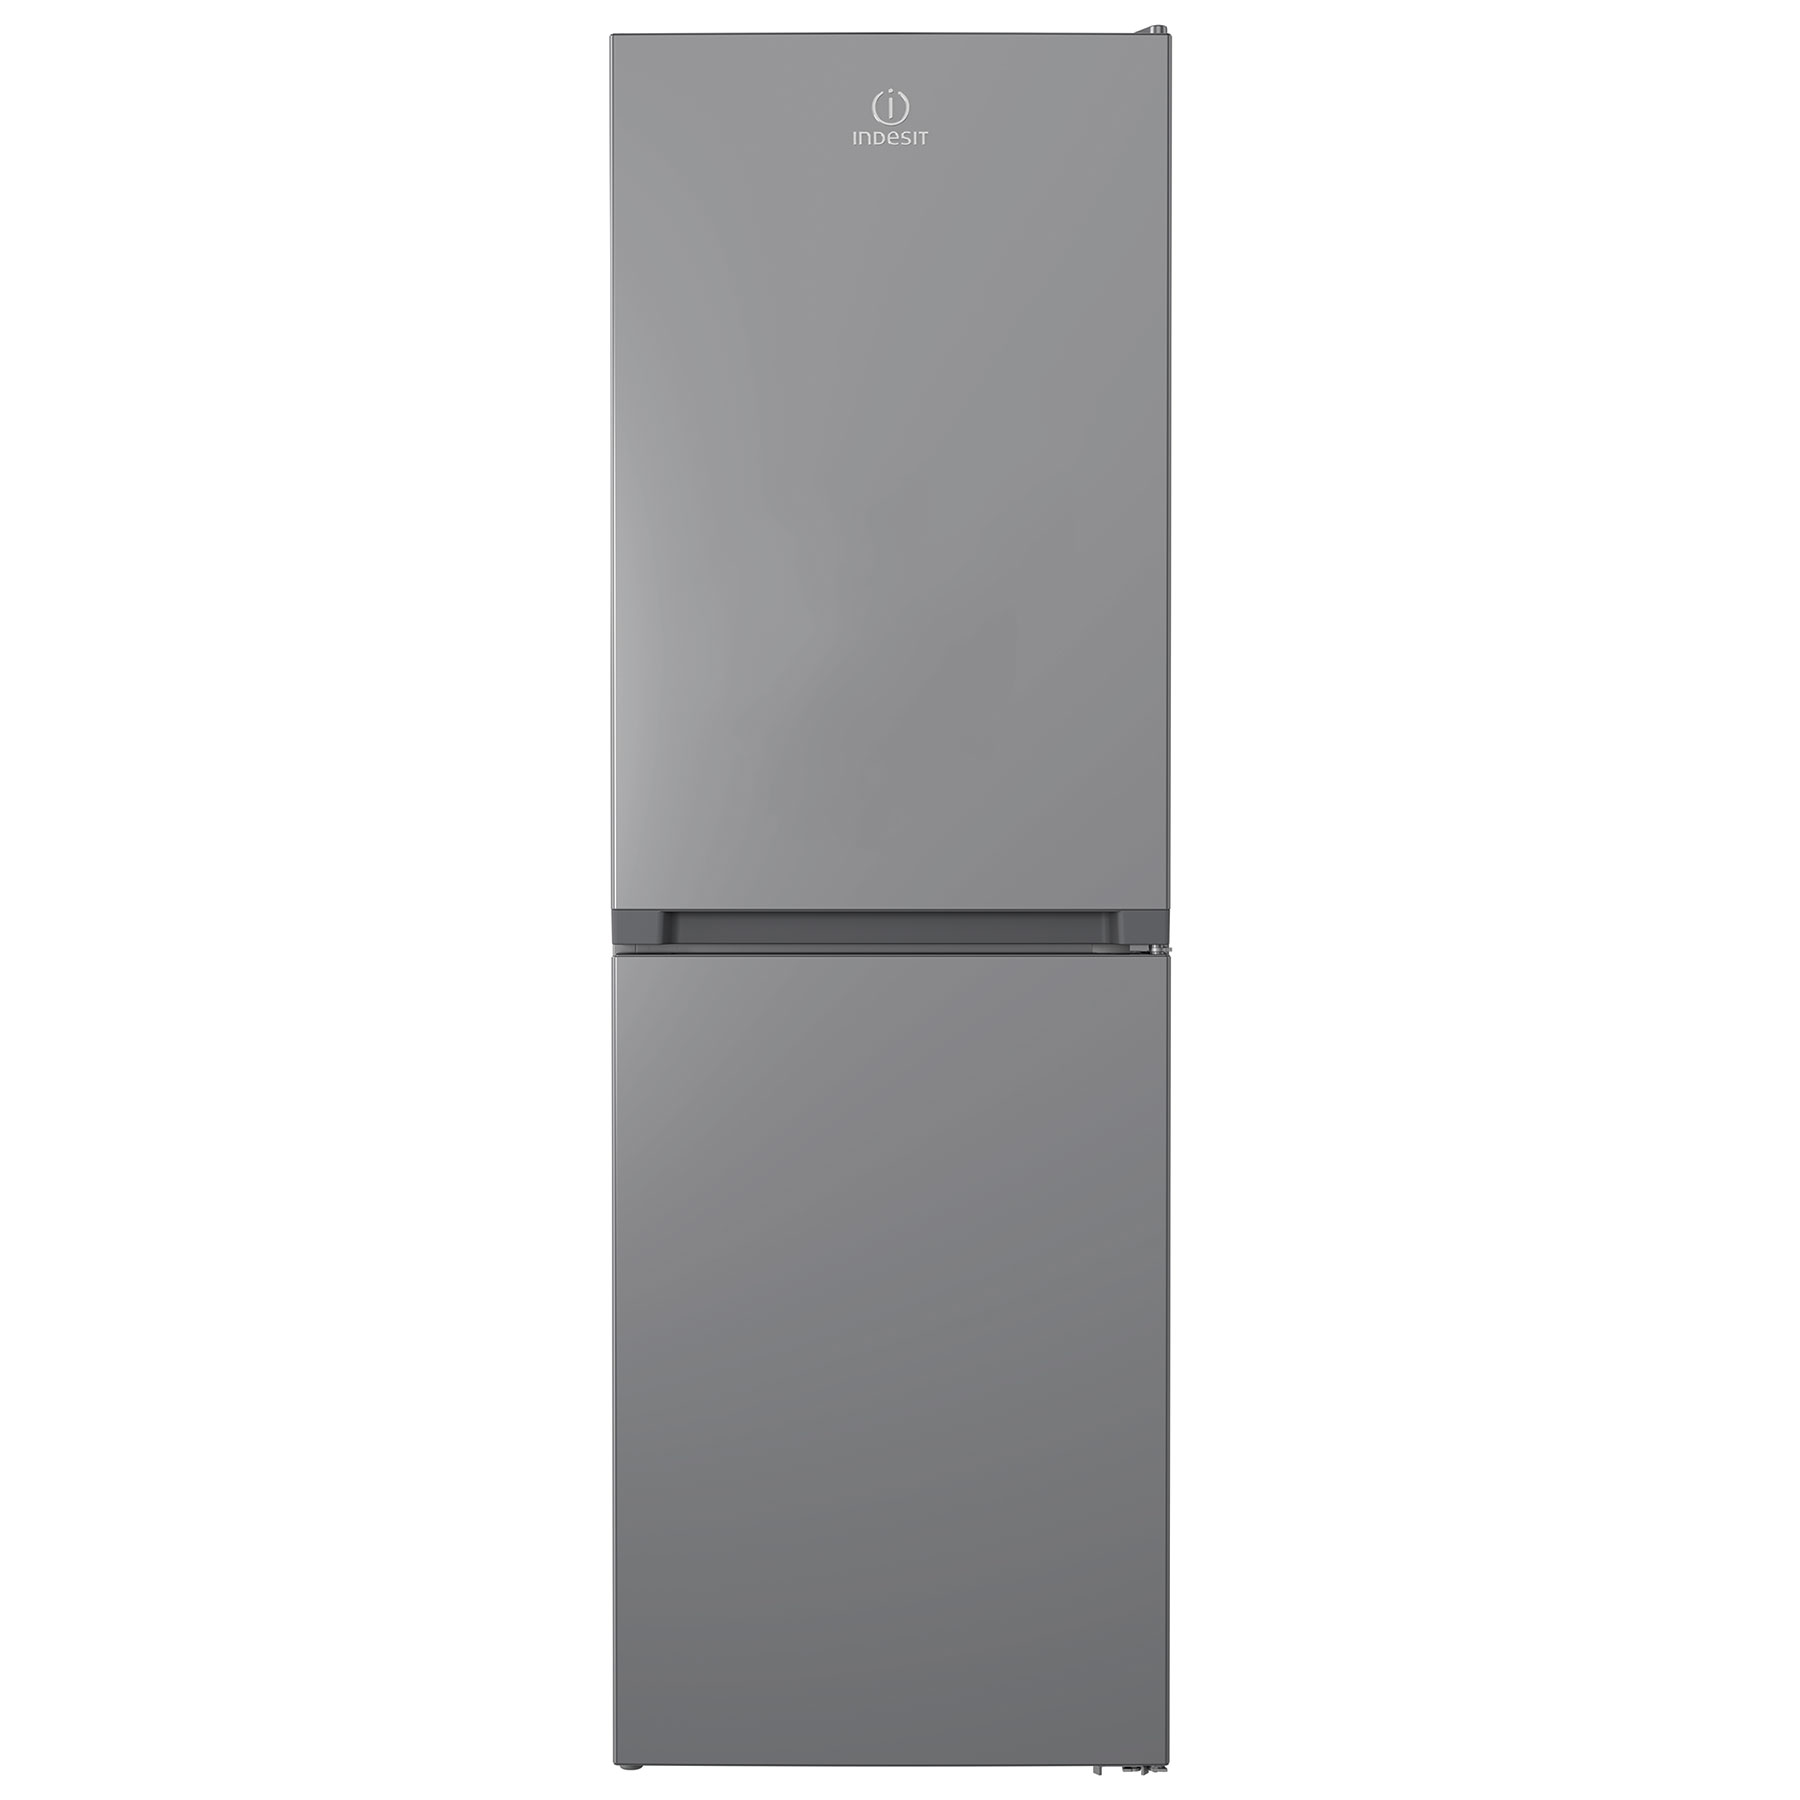 Image of Indesit IBTNF60182S 60cm Frost Free Fridge Freezer in Silver 1 86m E R